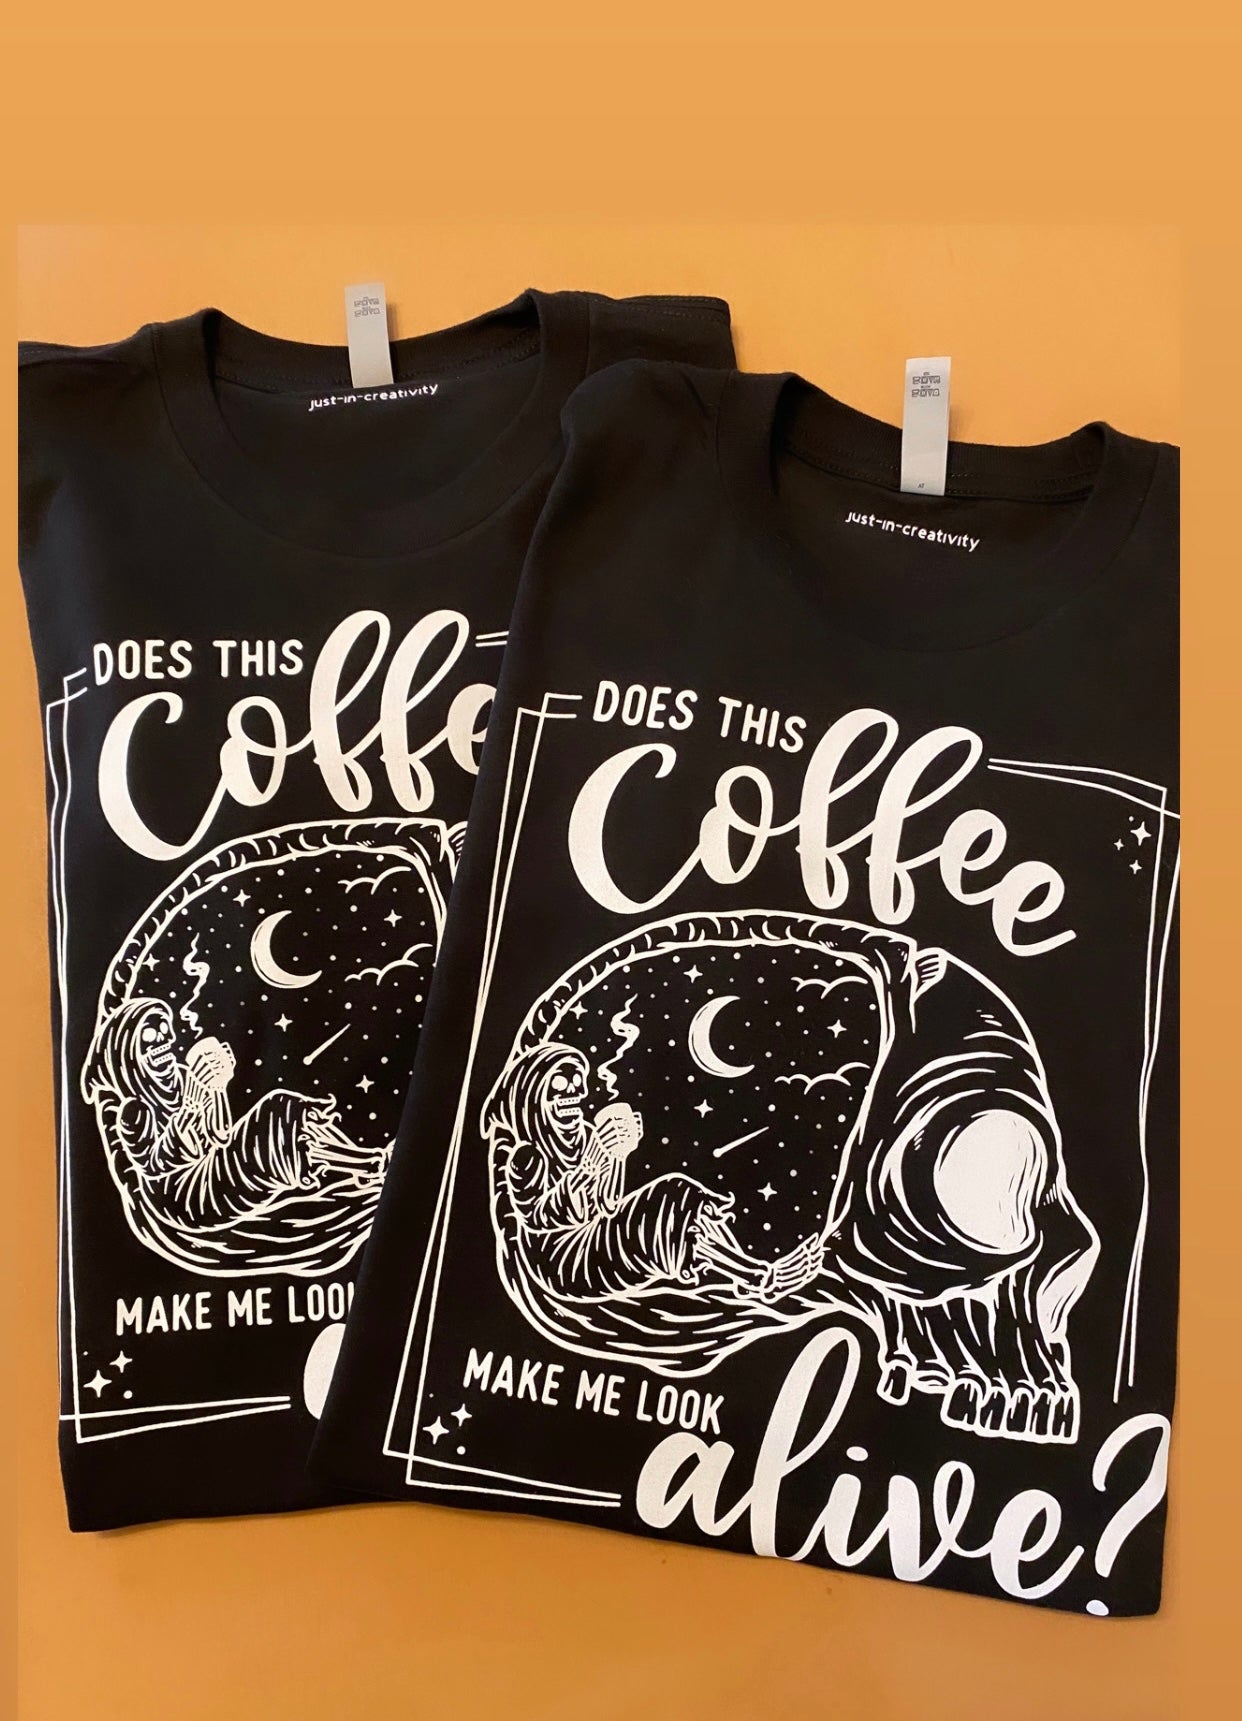 Does This Coffee Make Me Look Alive? Crewneck shirt – Just In Creativity